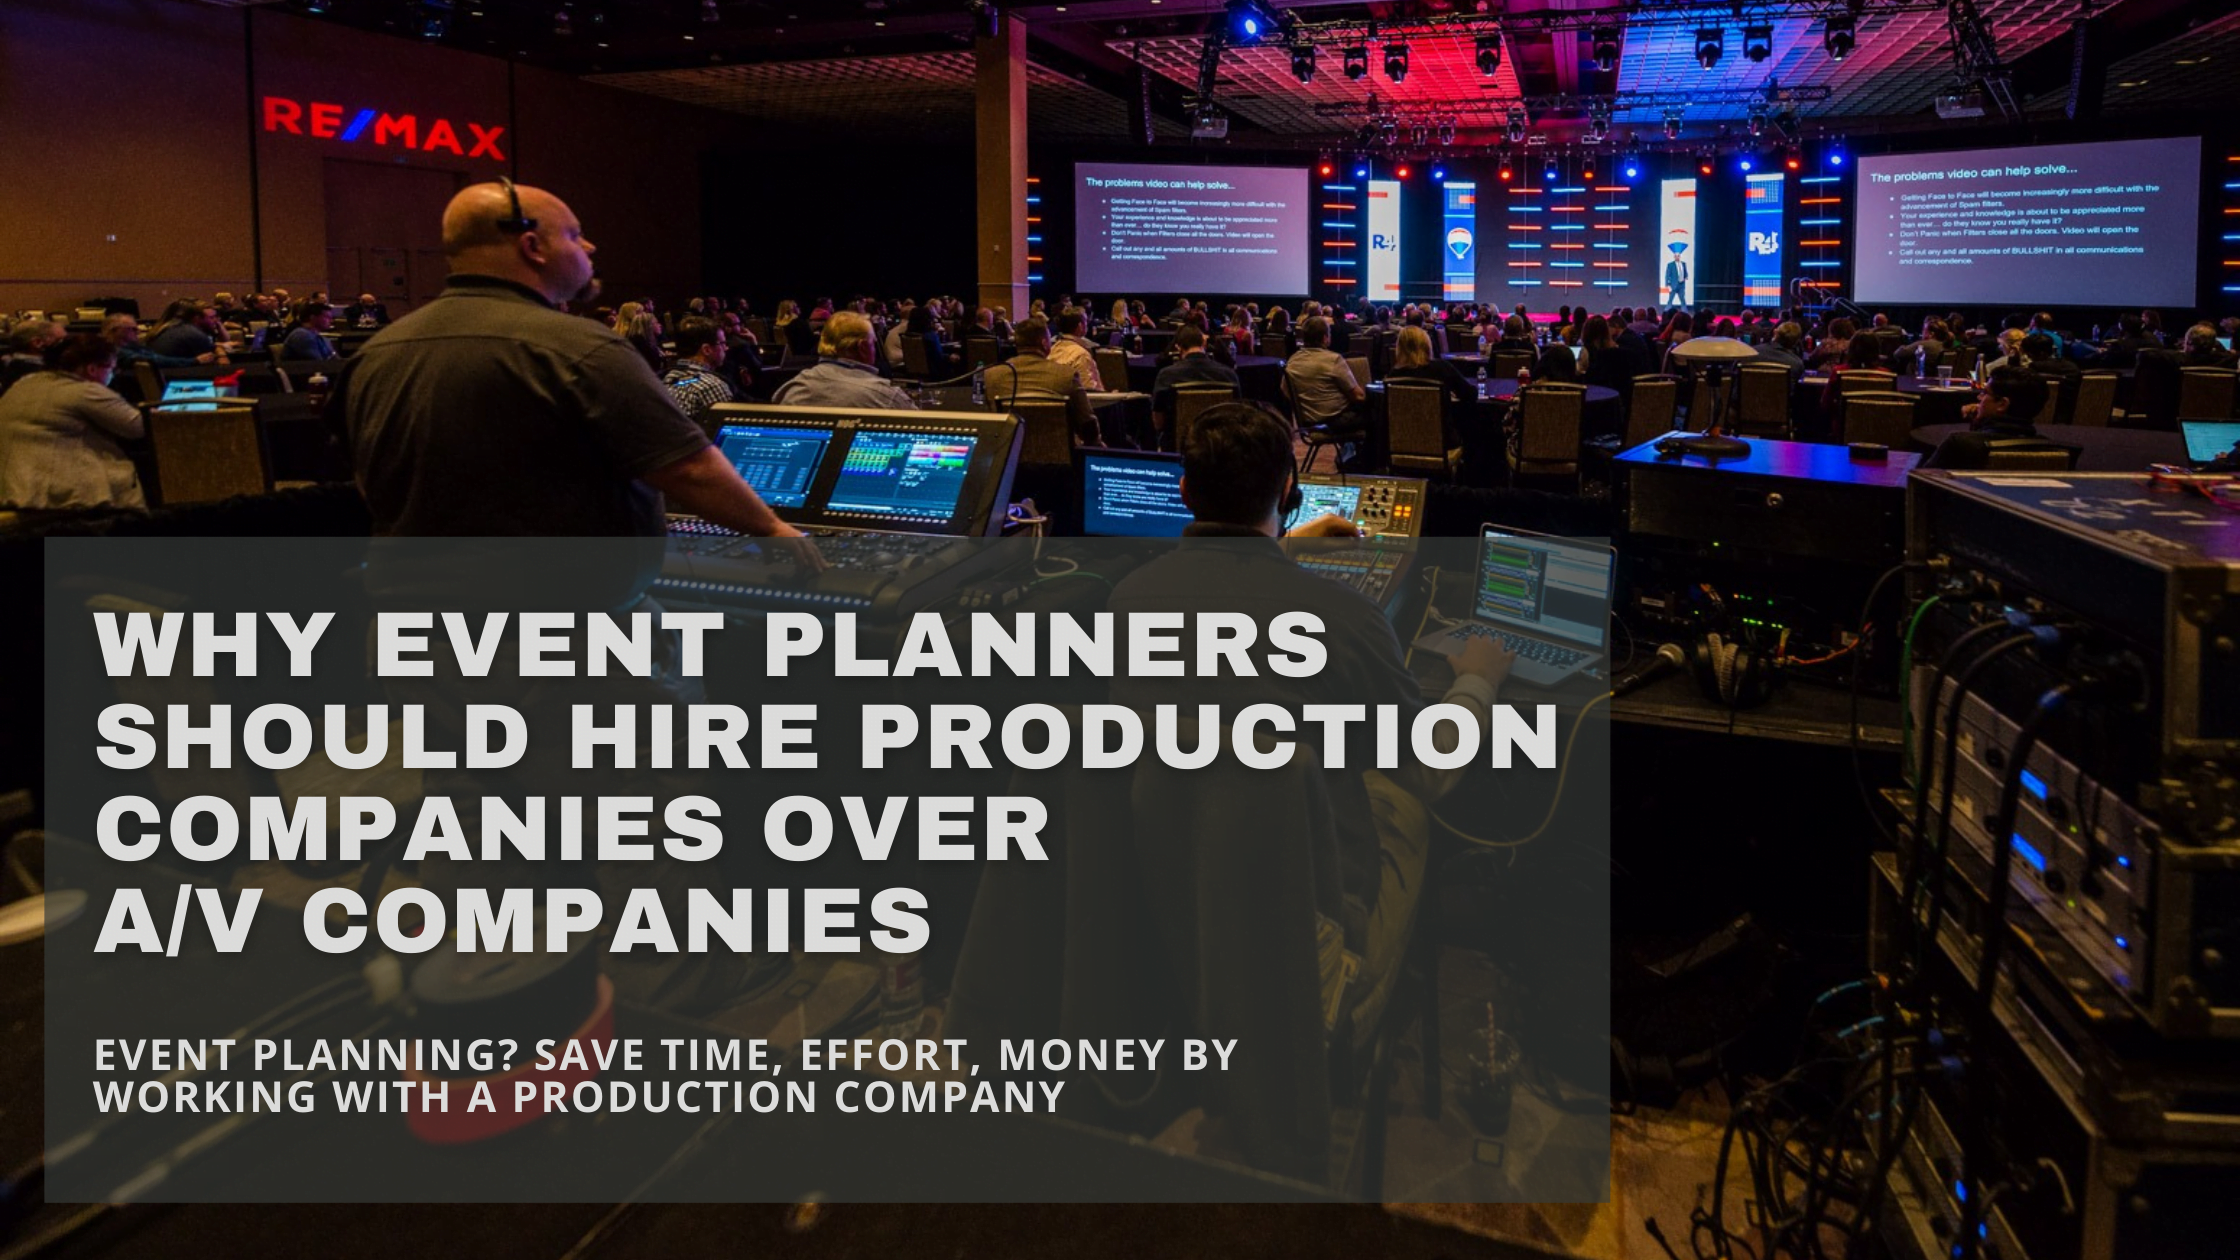 A graphic that says "Why event planners should hire production companies over A/V companies" over a pictures of an event